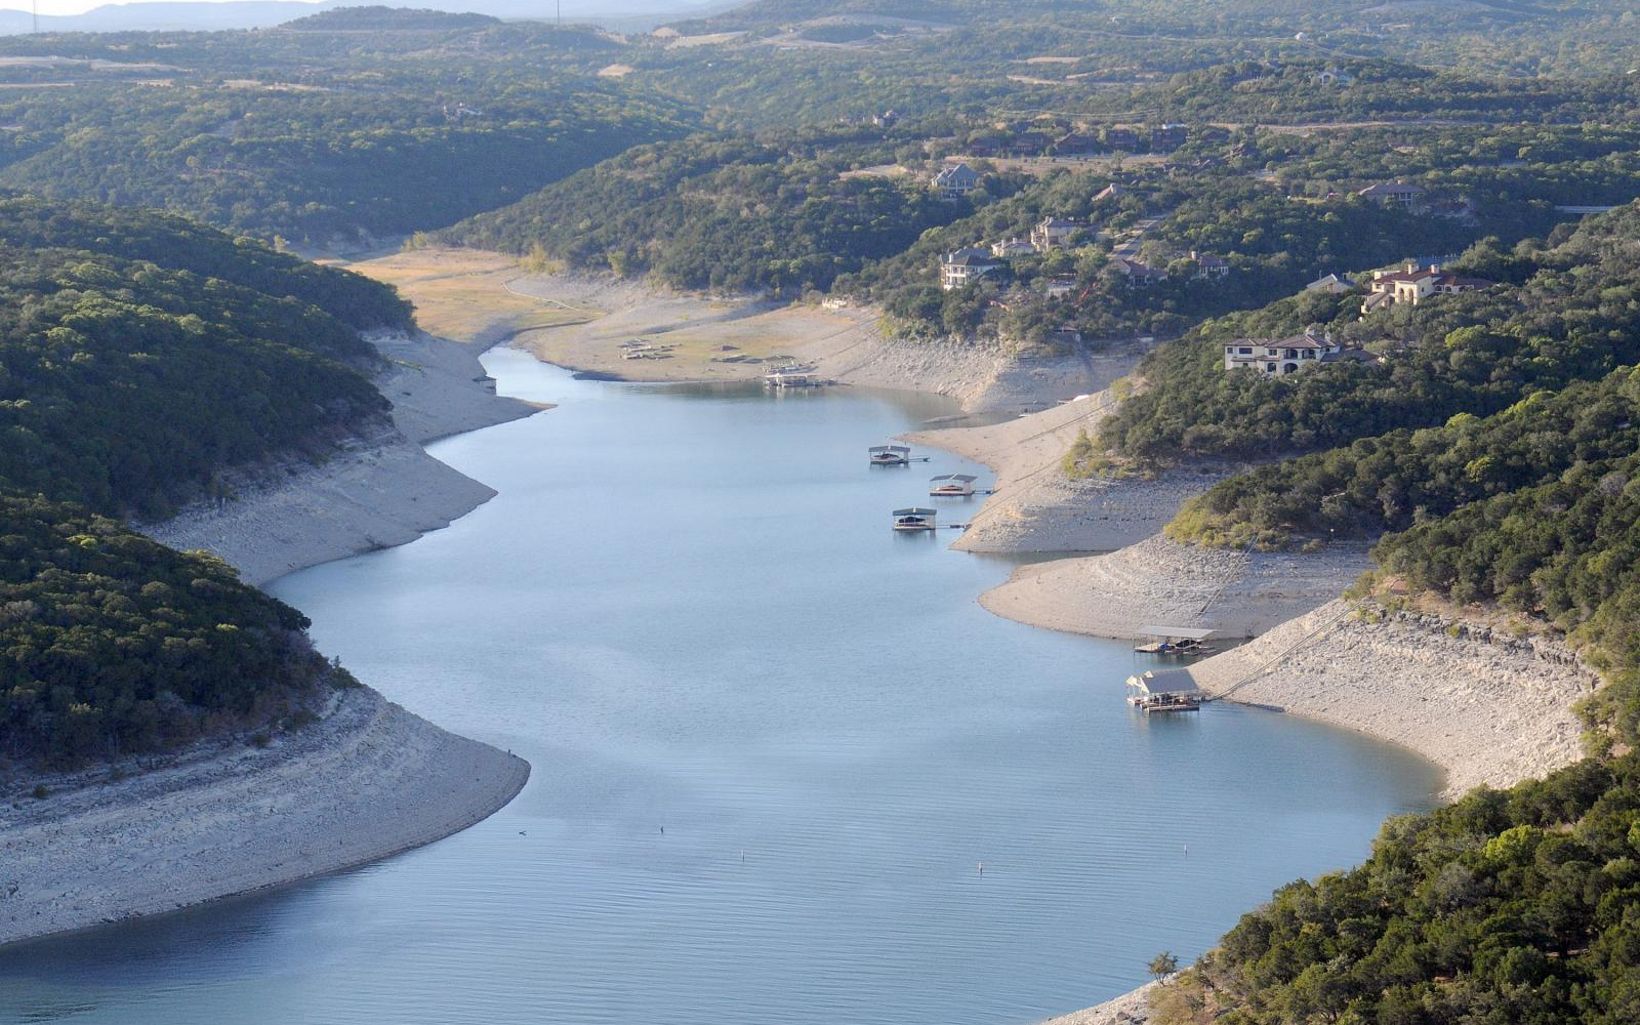 
                
                  Releases from the LCRA's reservoirs support nature, but have been cut in recent drought years. By purchasing stored water or conserving water on farms, a WSIP could help secure more water for nature.
                  © Chase A. Fountain for Texas Parks and Wildlife Department
                
              